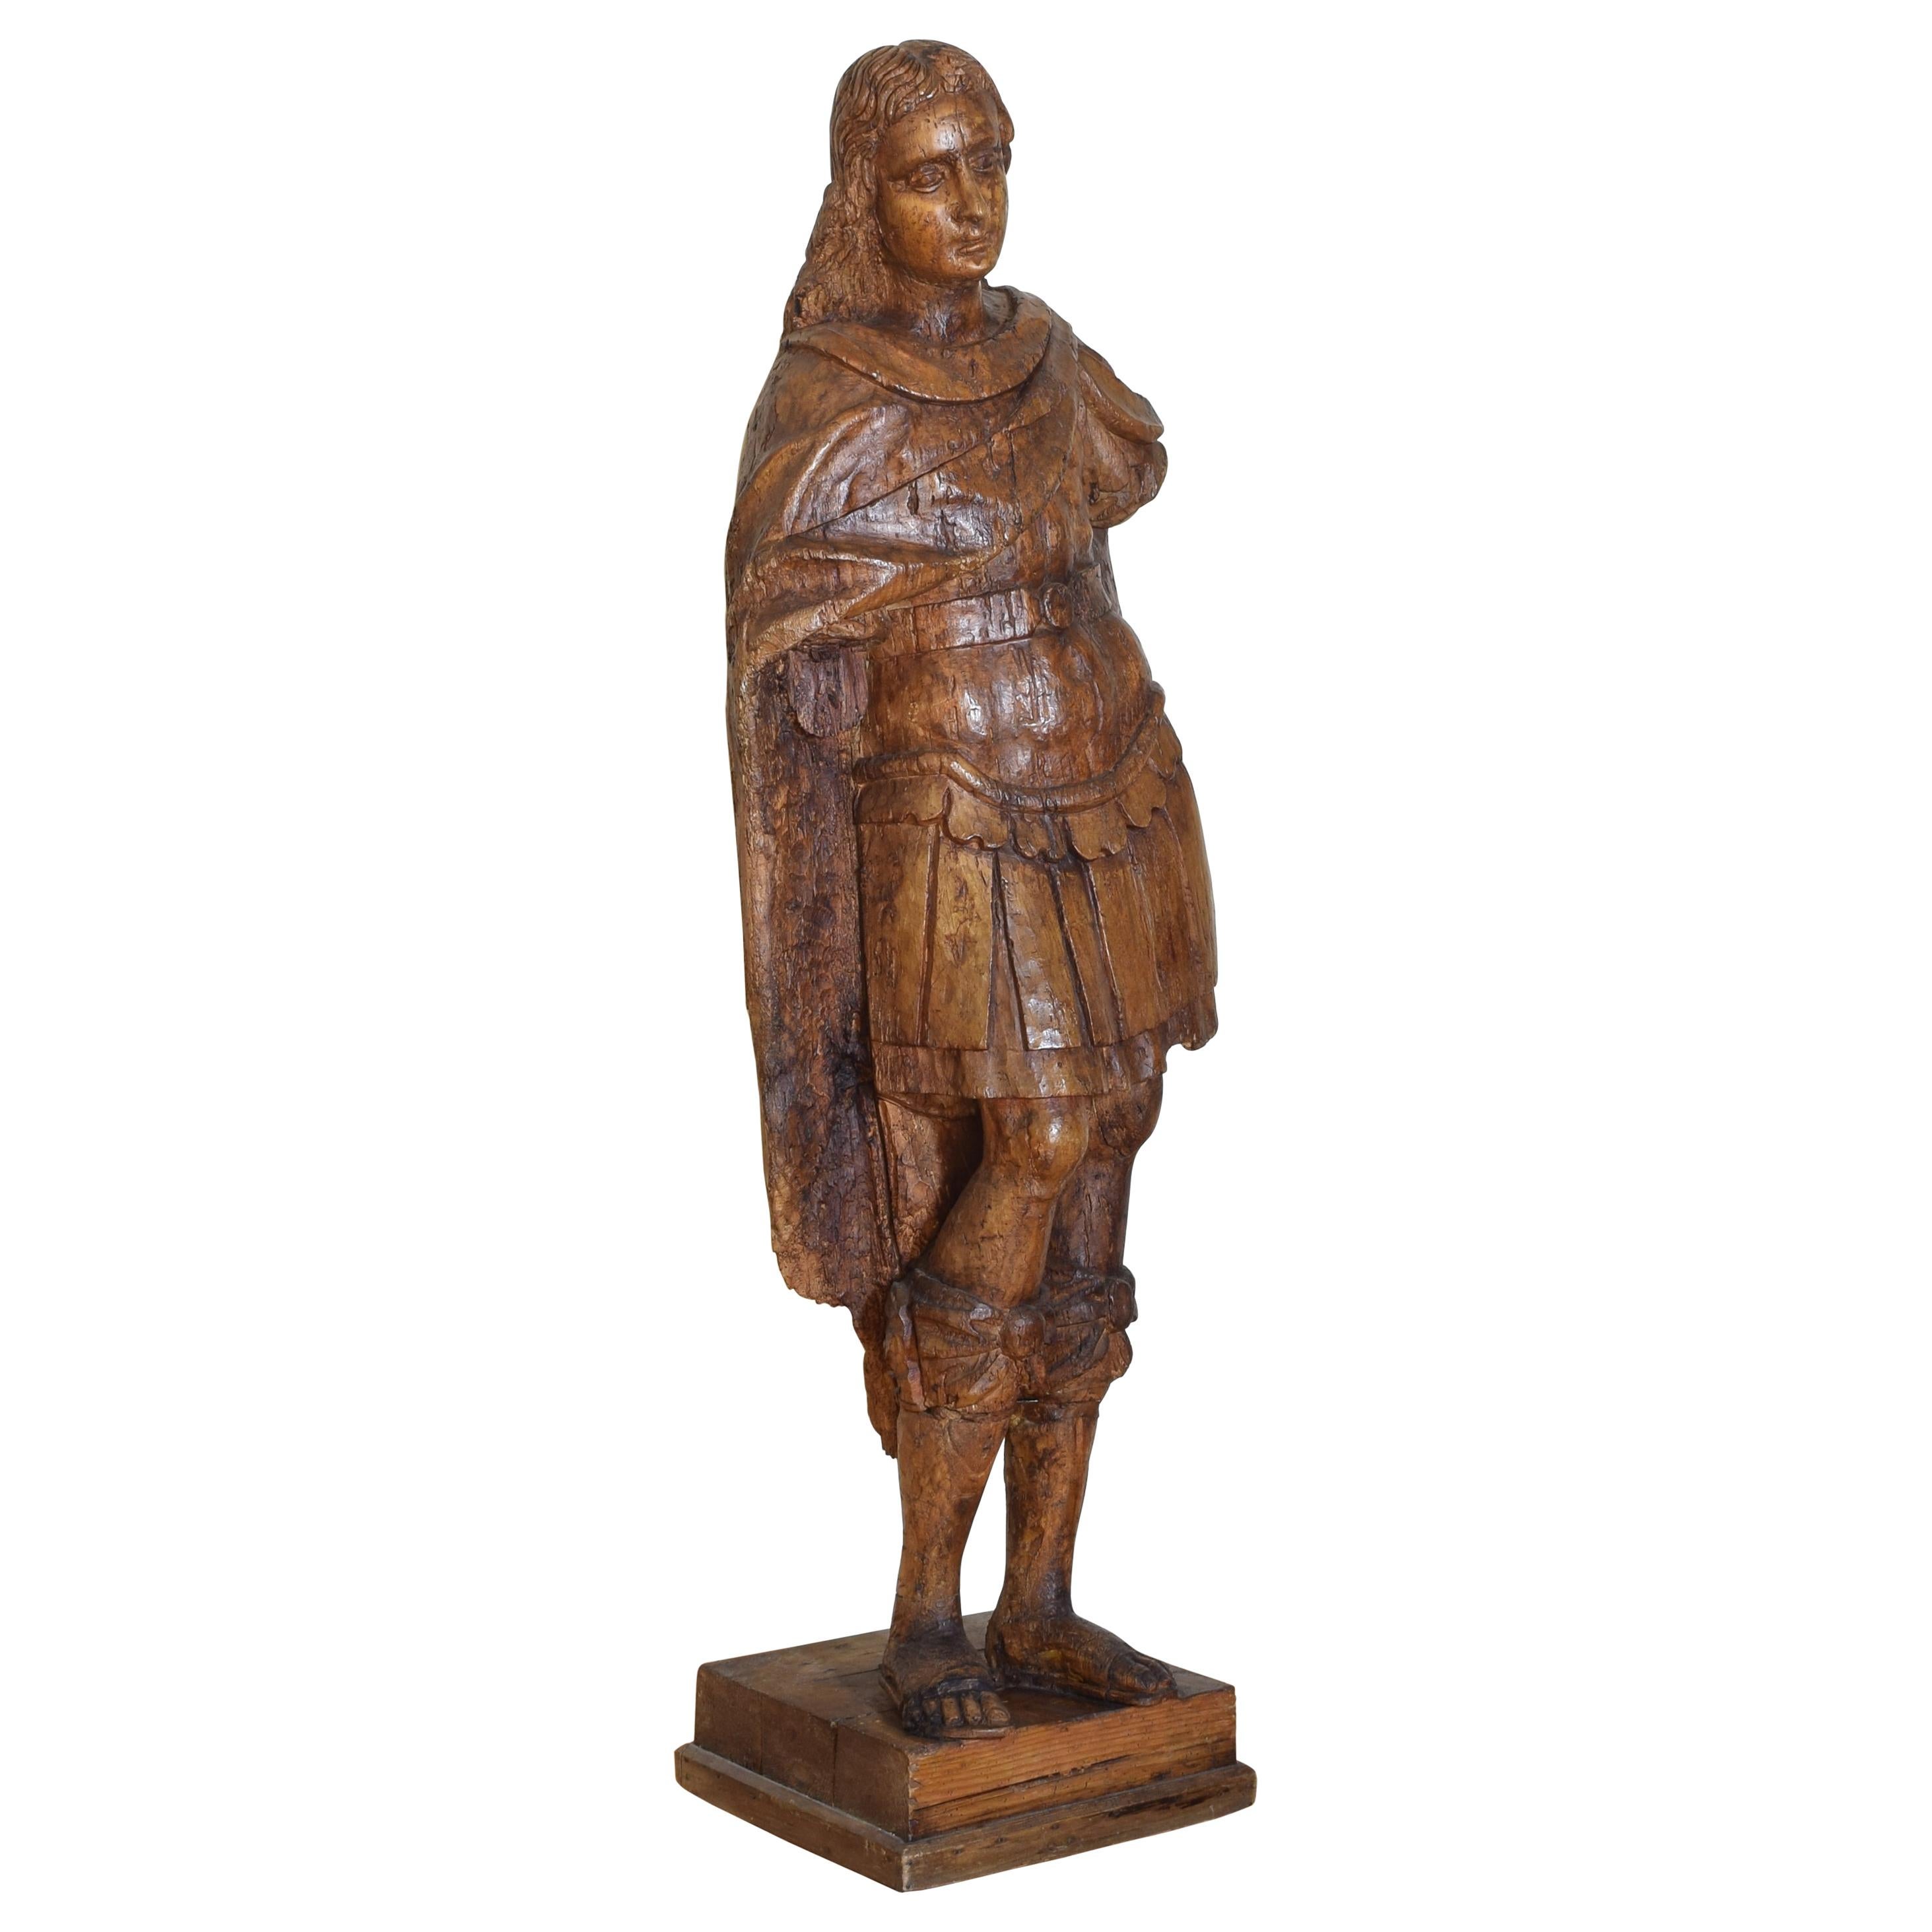 Northern Italian Carved Pinewood Sculpture of Saint Michael, Early 18th Century